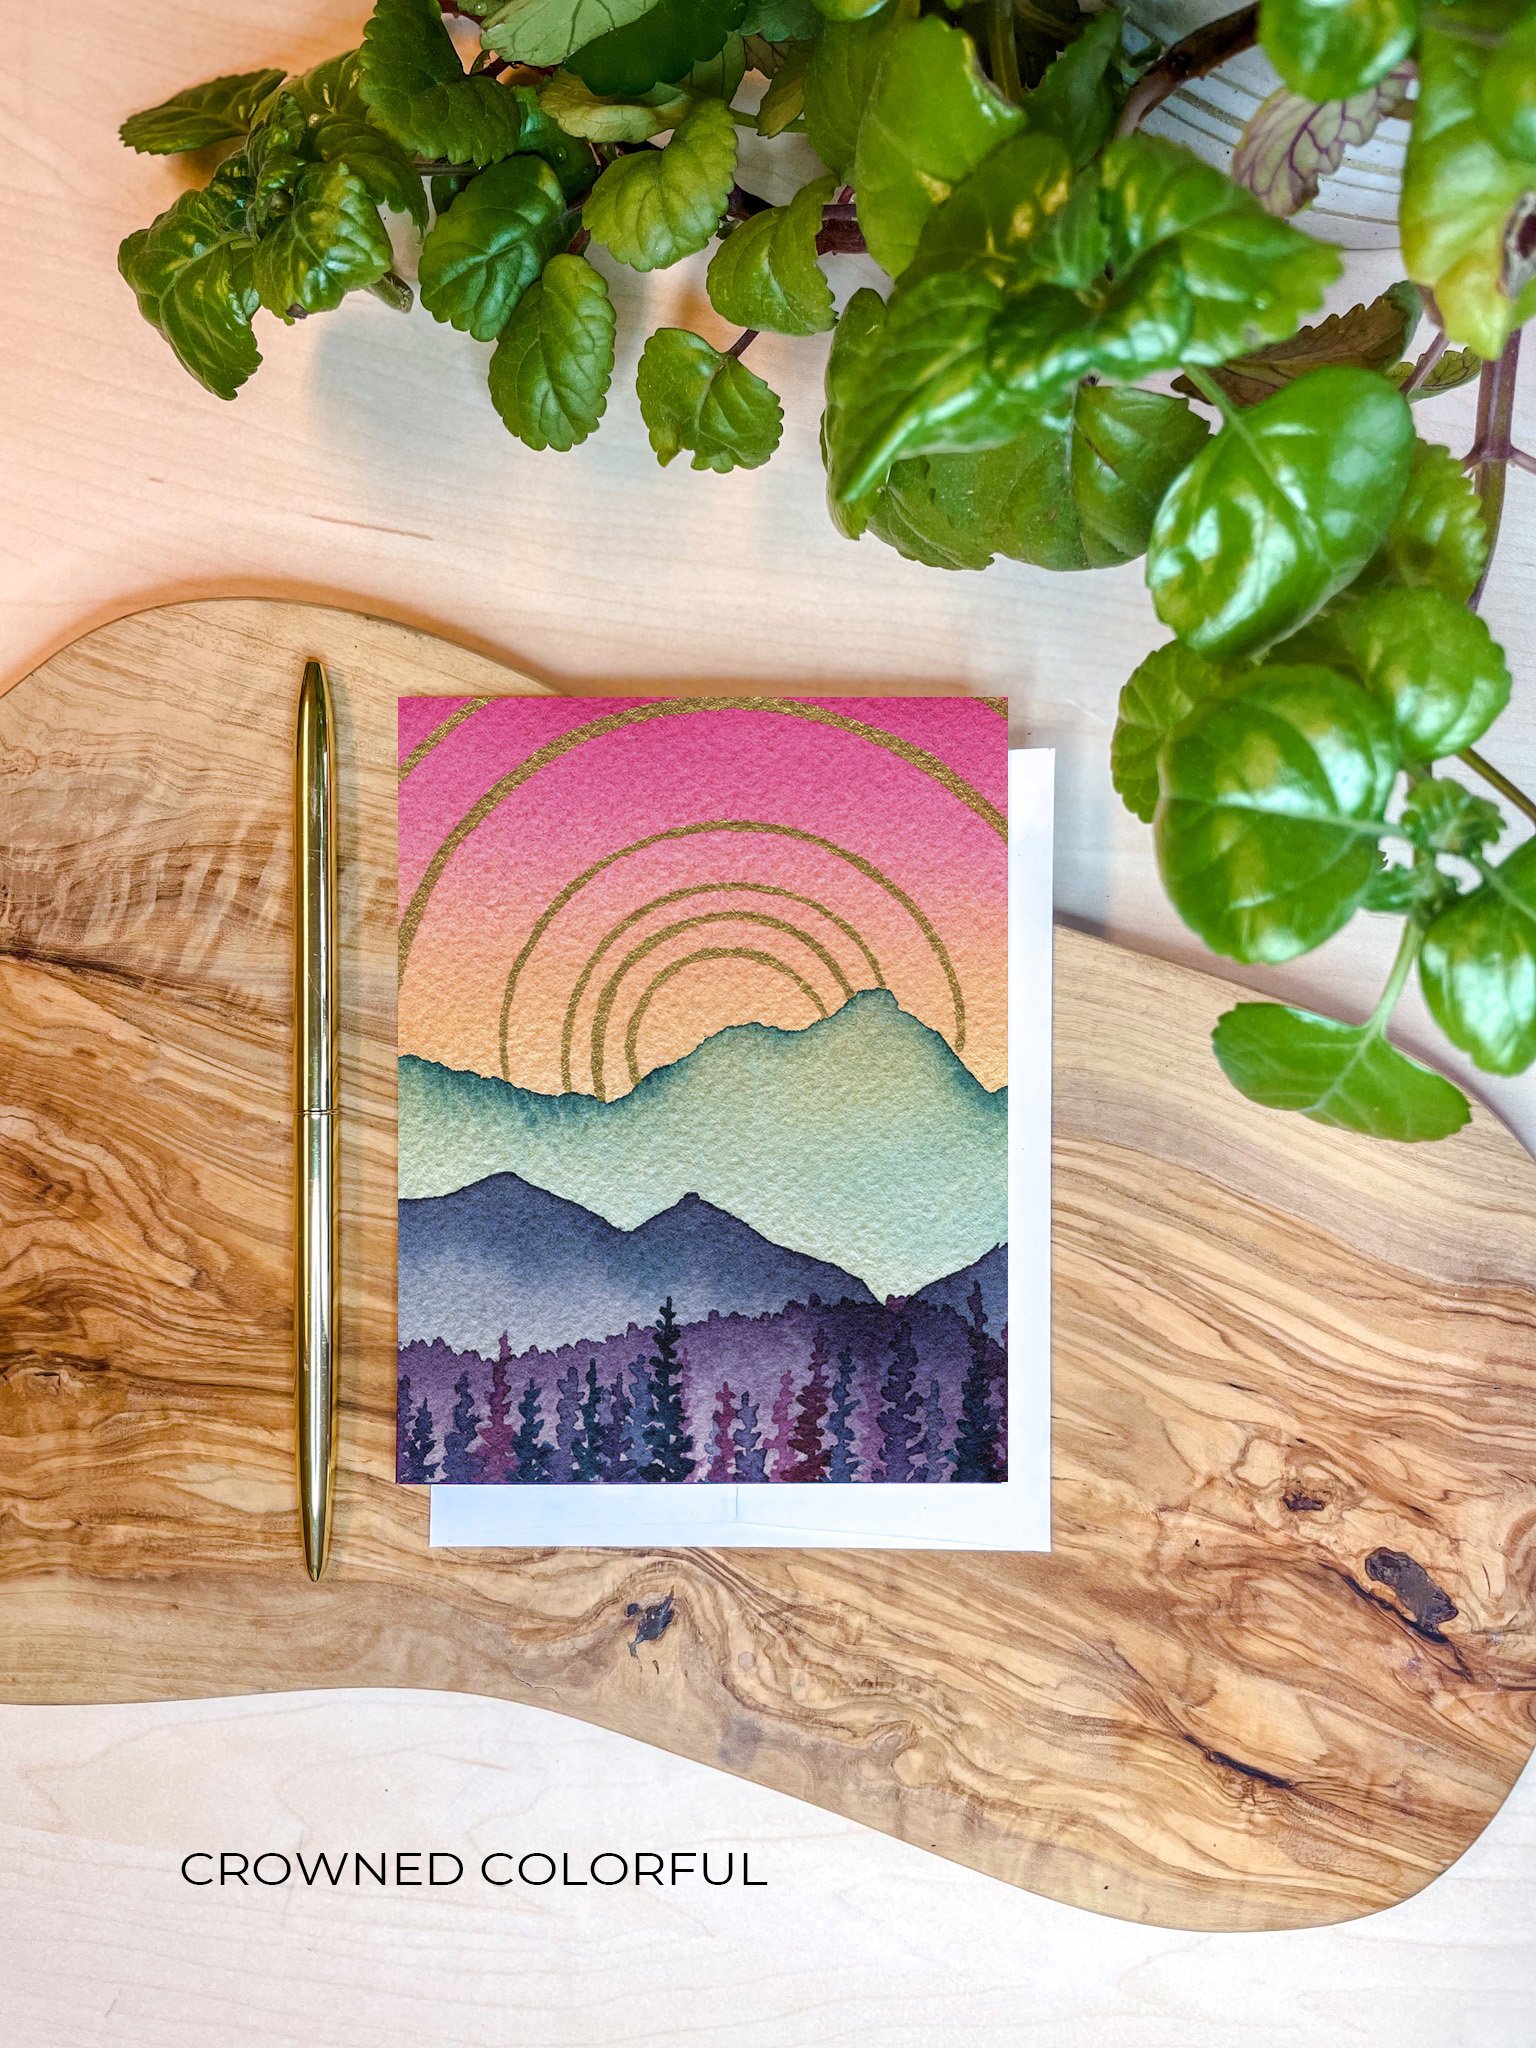 Mountain Sunshine Art Cards 8 Blank Cards With Envelopes Blank Notecards Greeting  Cards Watercolor Cards 